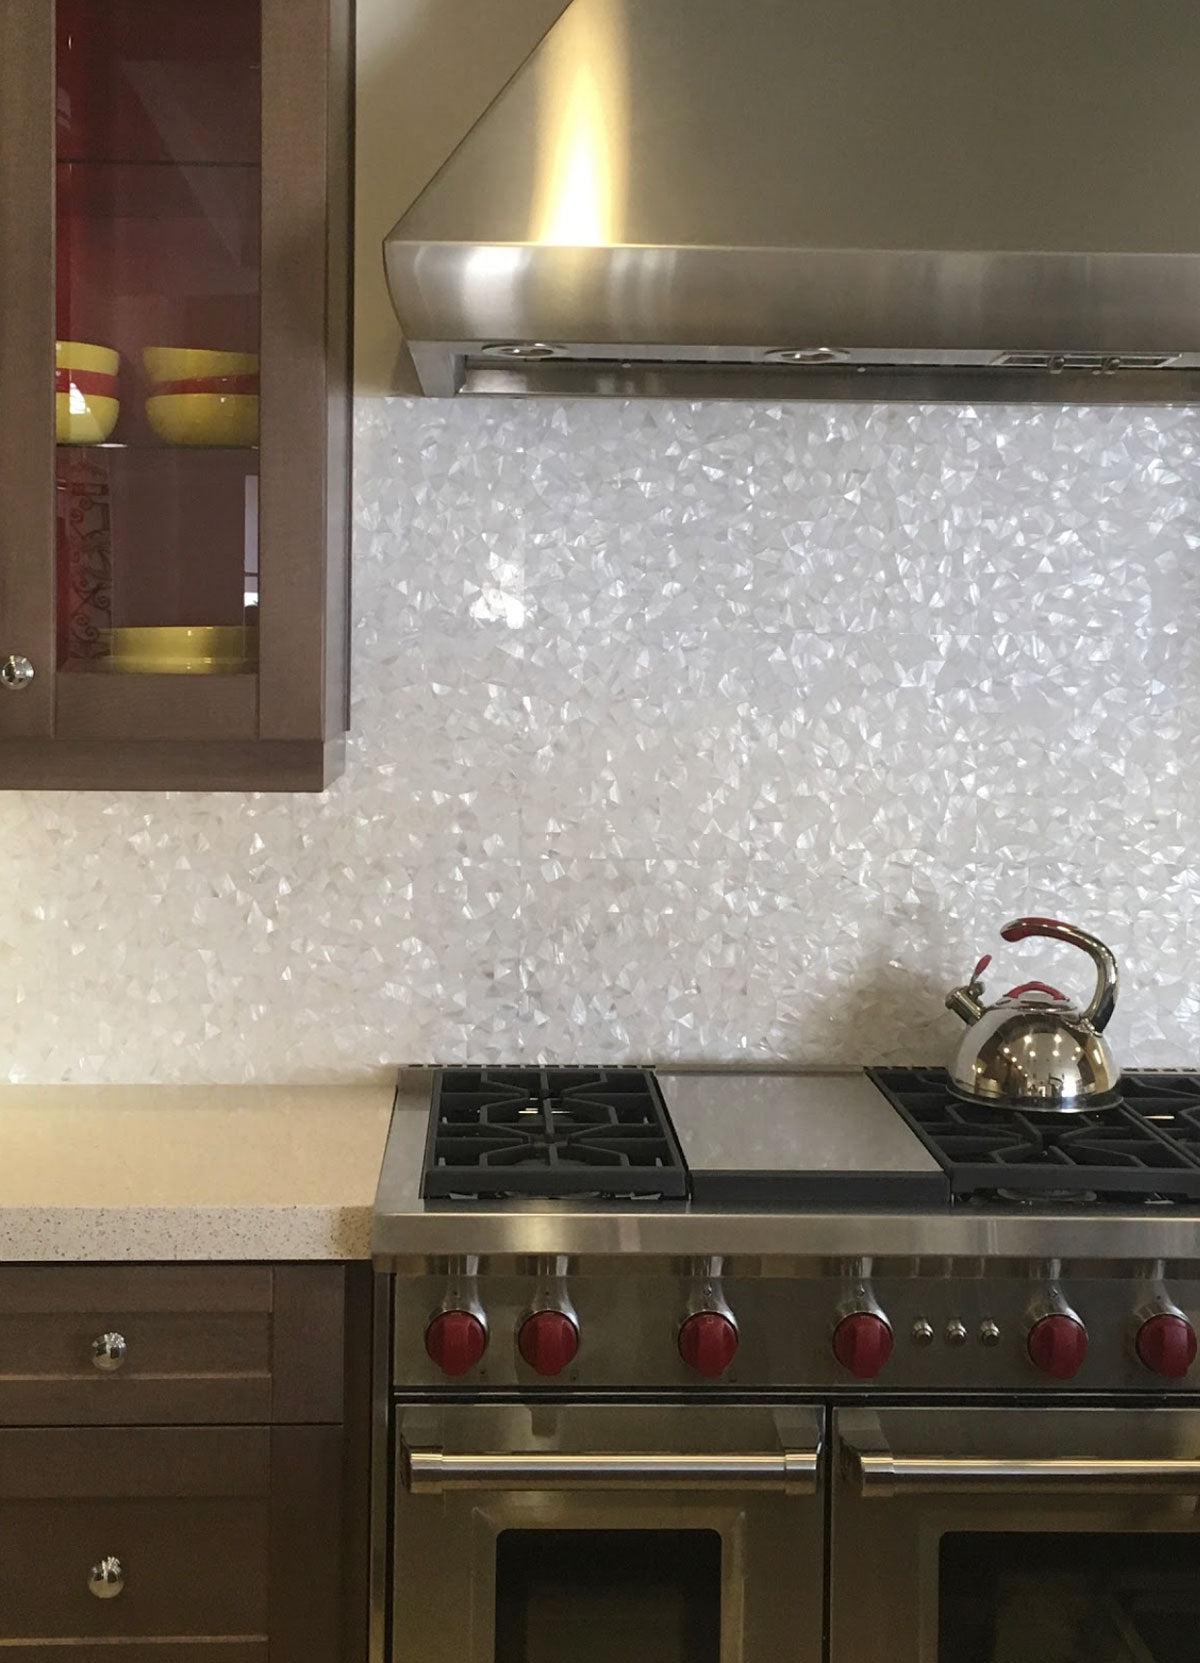 Groutless Pure White Illusion Mother Of Pearl Mosaic Tile Backsplash Behind the Stove